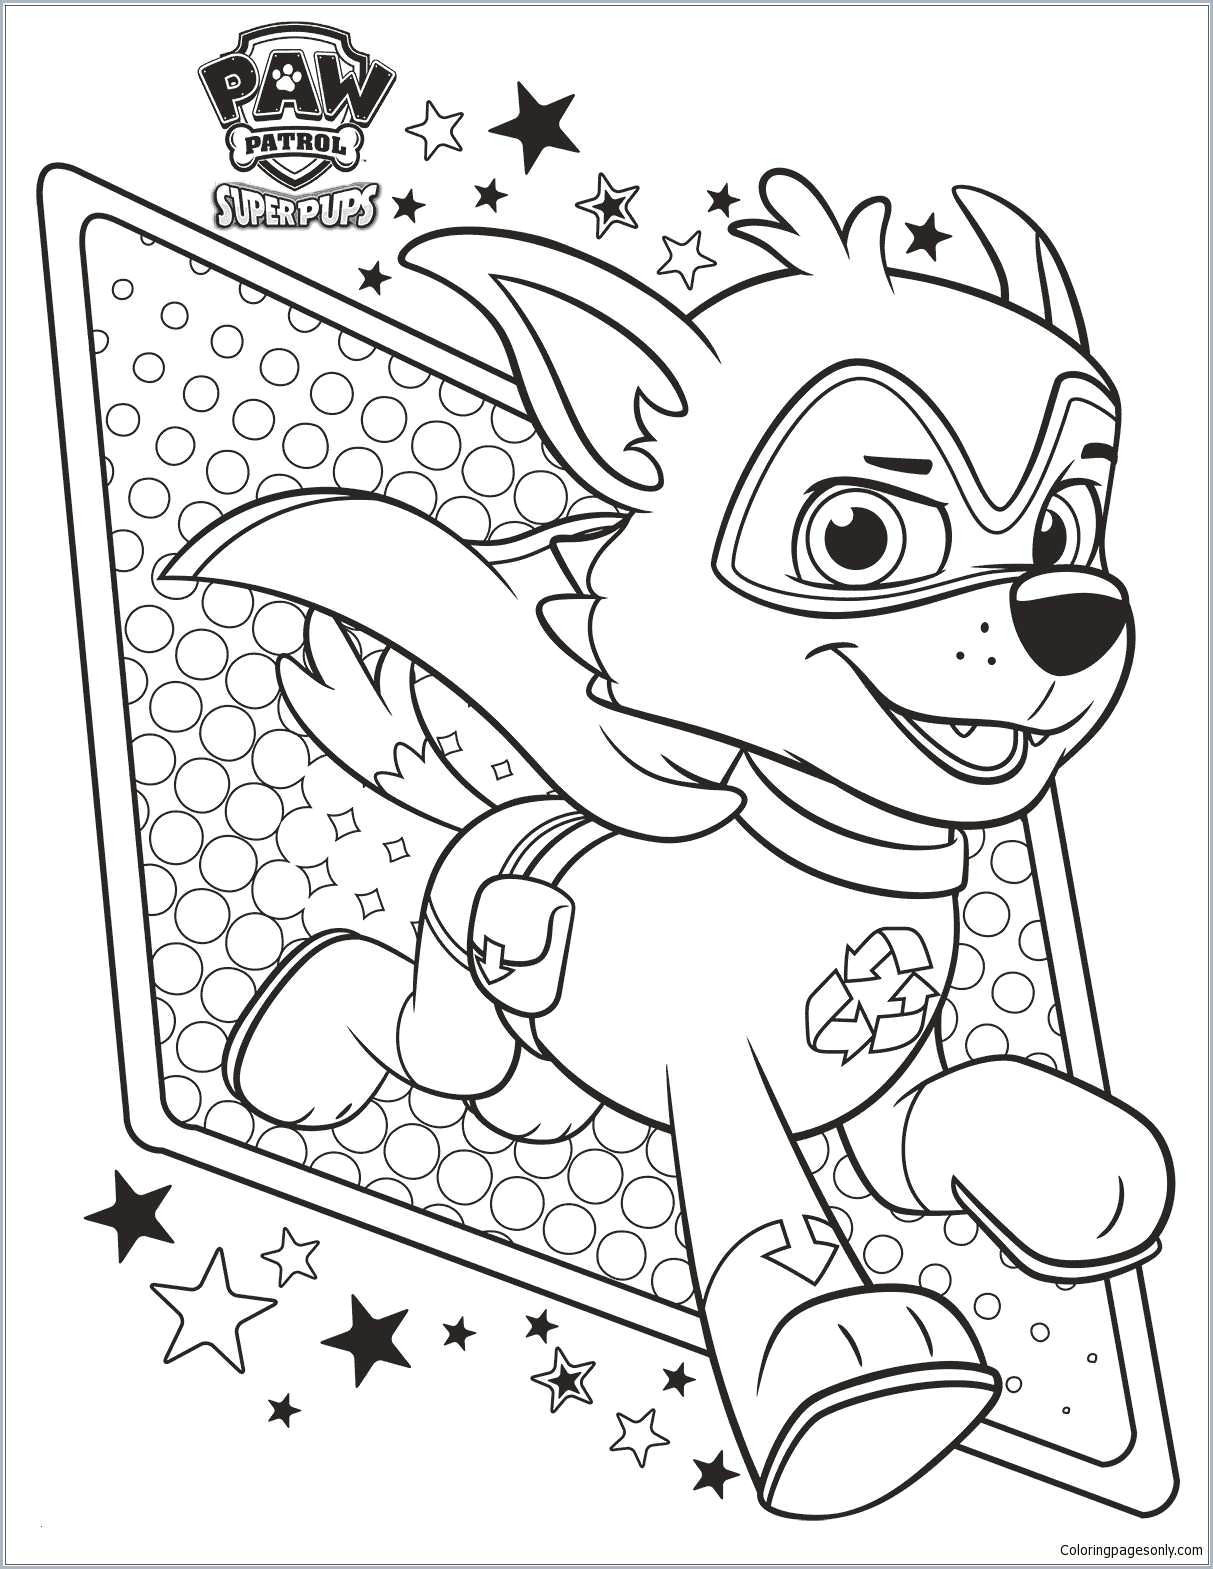 easy coloring pages halloween fresh nick jr halloween coloring pages paw patrol archives publimasco paw of